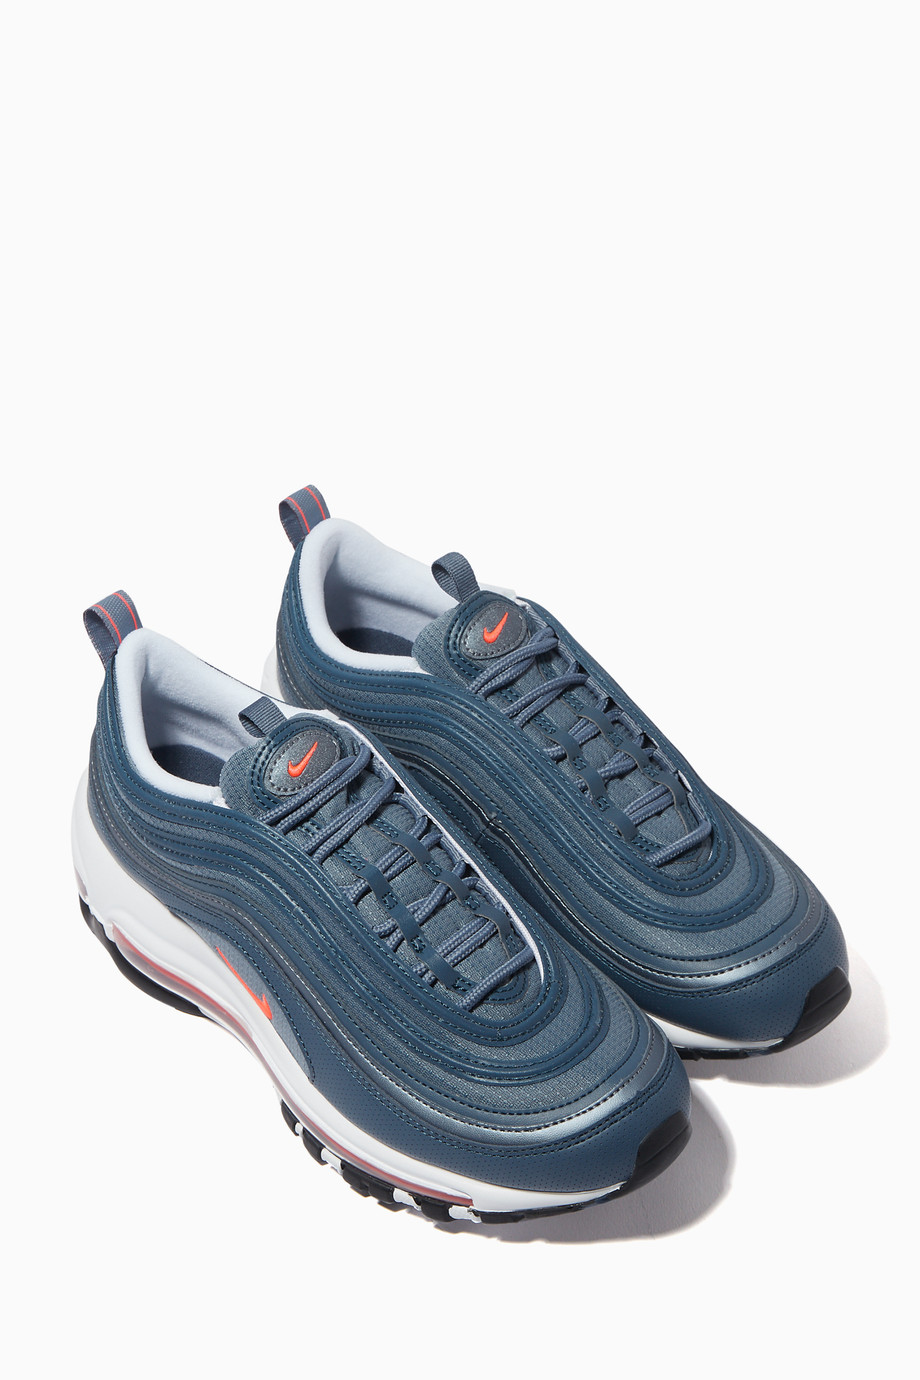 Nike Air Max 97 price in Kuwait Compare Prices